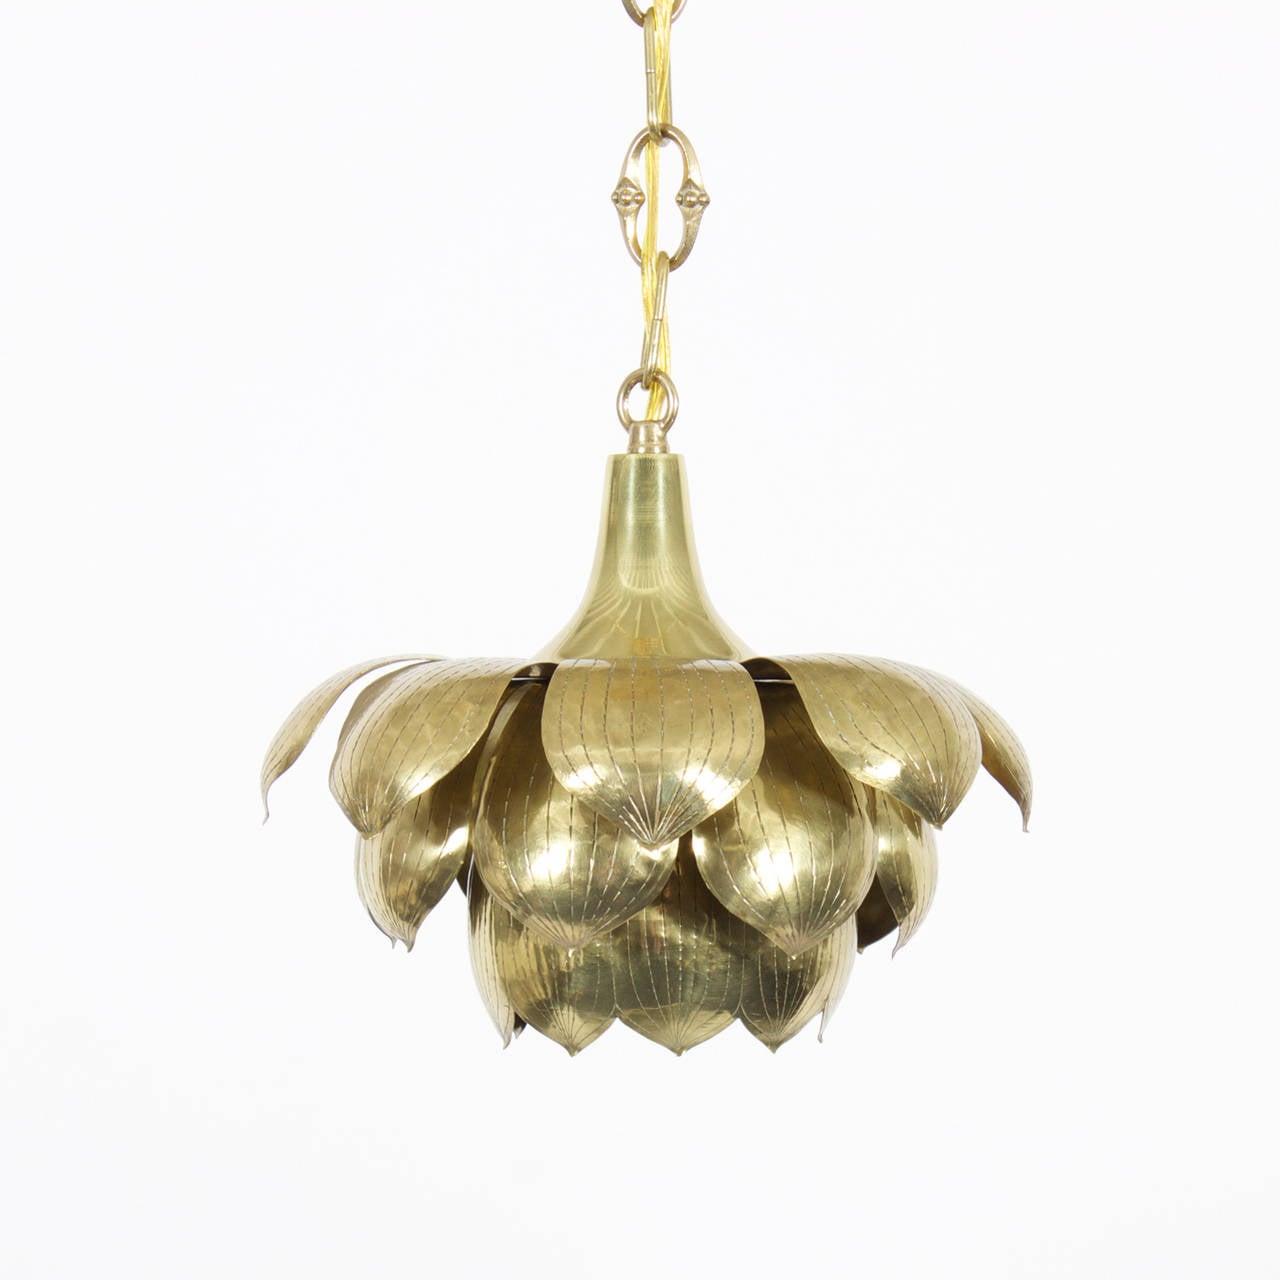 An etched brass lotus pendant light or chandelier, in the Feldman manner, if not made by Feldman. Newly wired. Lovely piece.